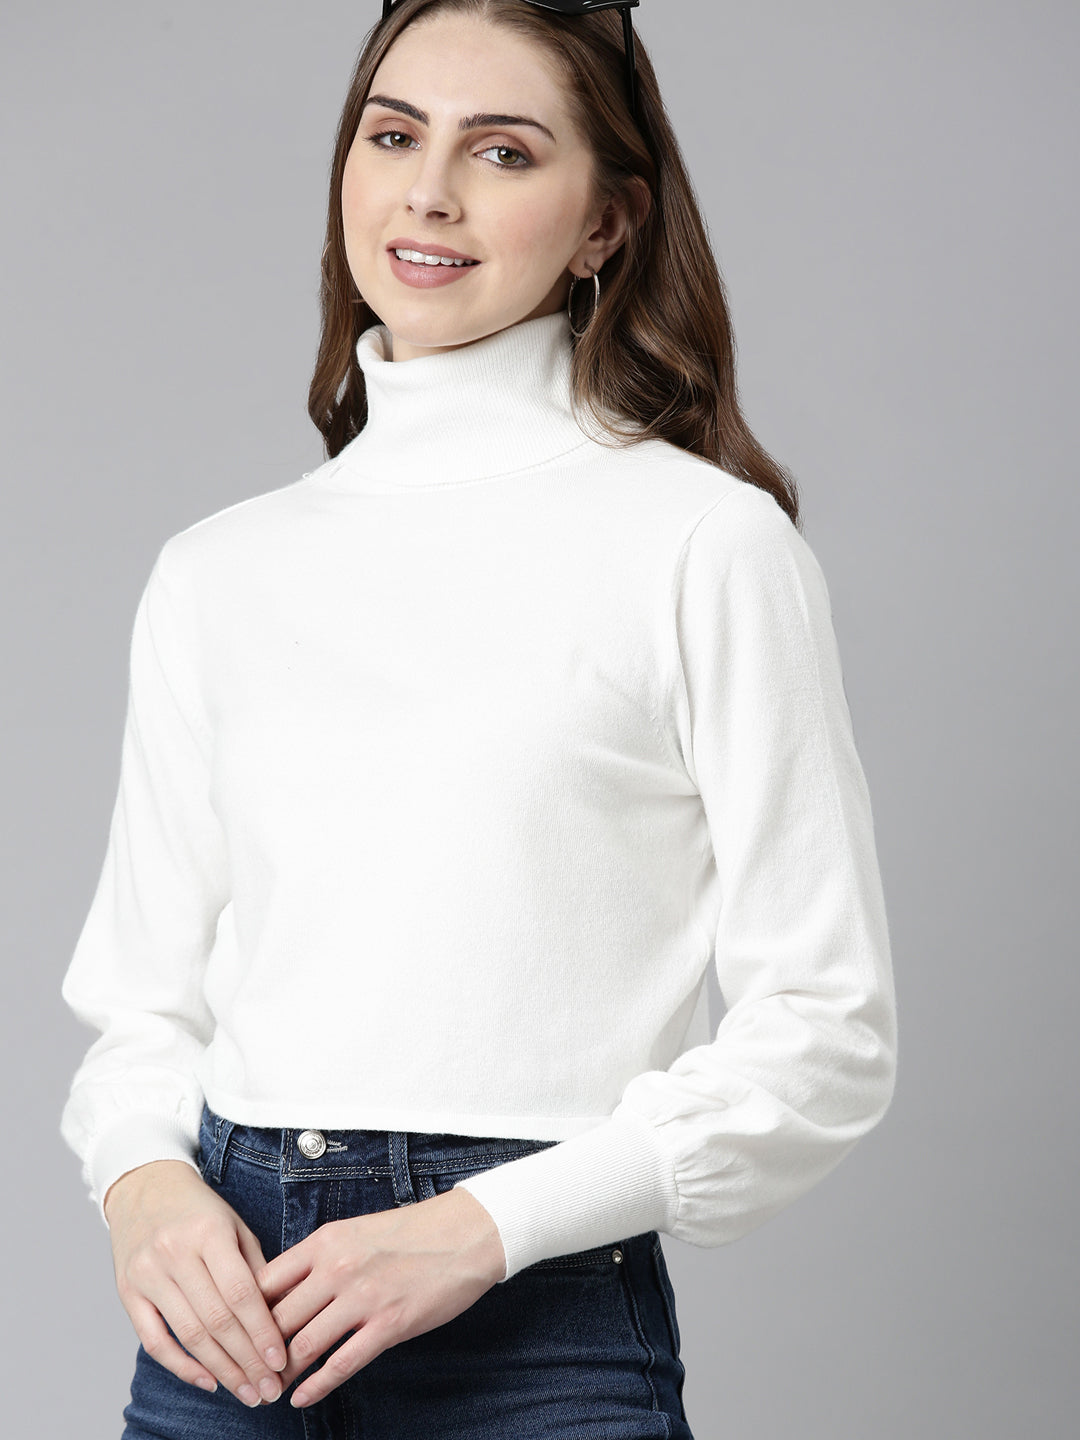 High Neck Solid Cuffed Sleeves White Crop Top